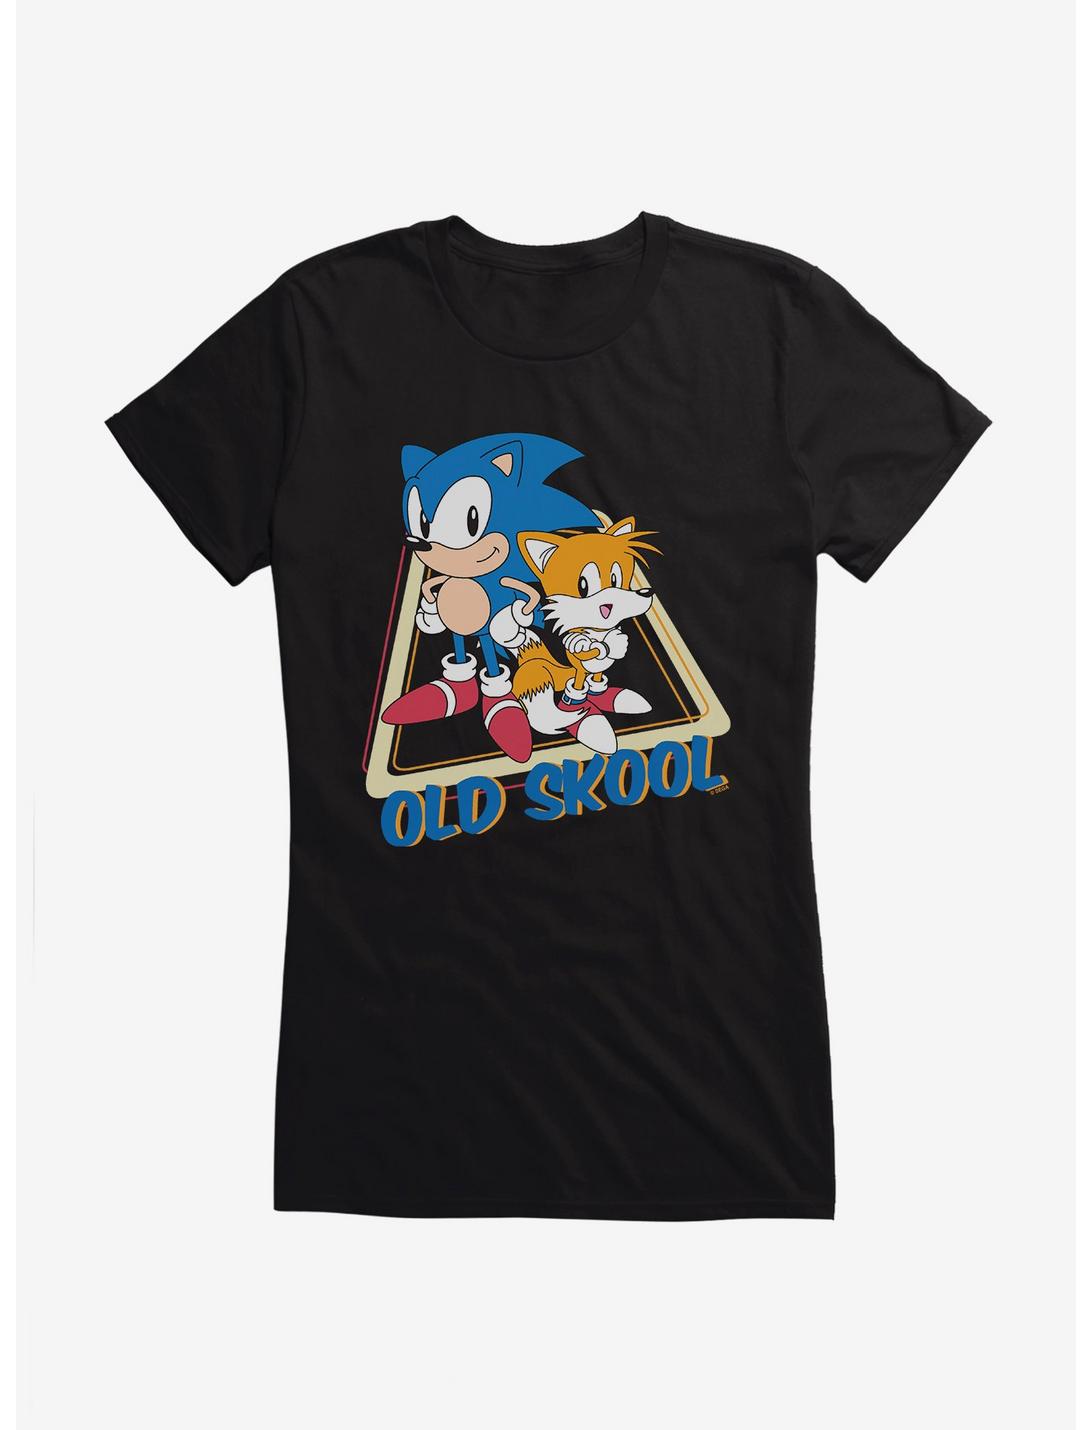 Sonic The Hedgehog Sonic And Tails Old Skool Girls T-Shirt, BLACK, hi-res